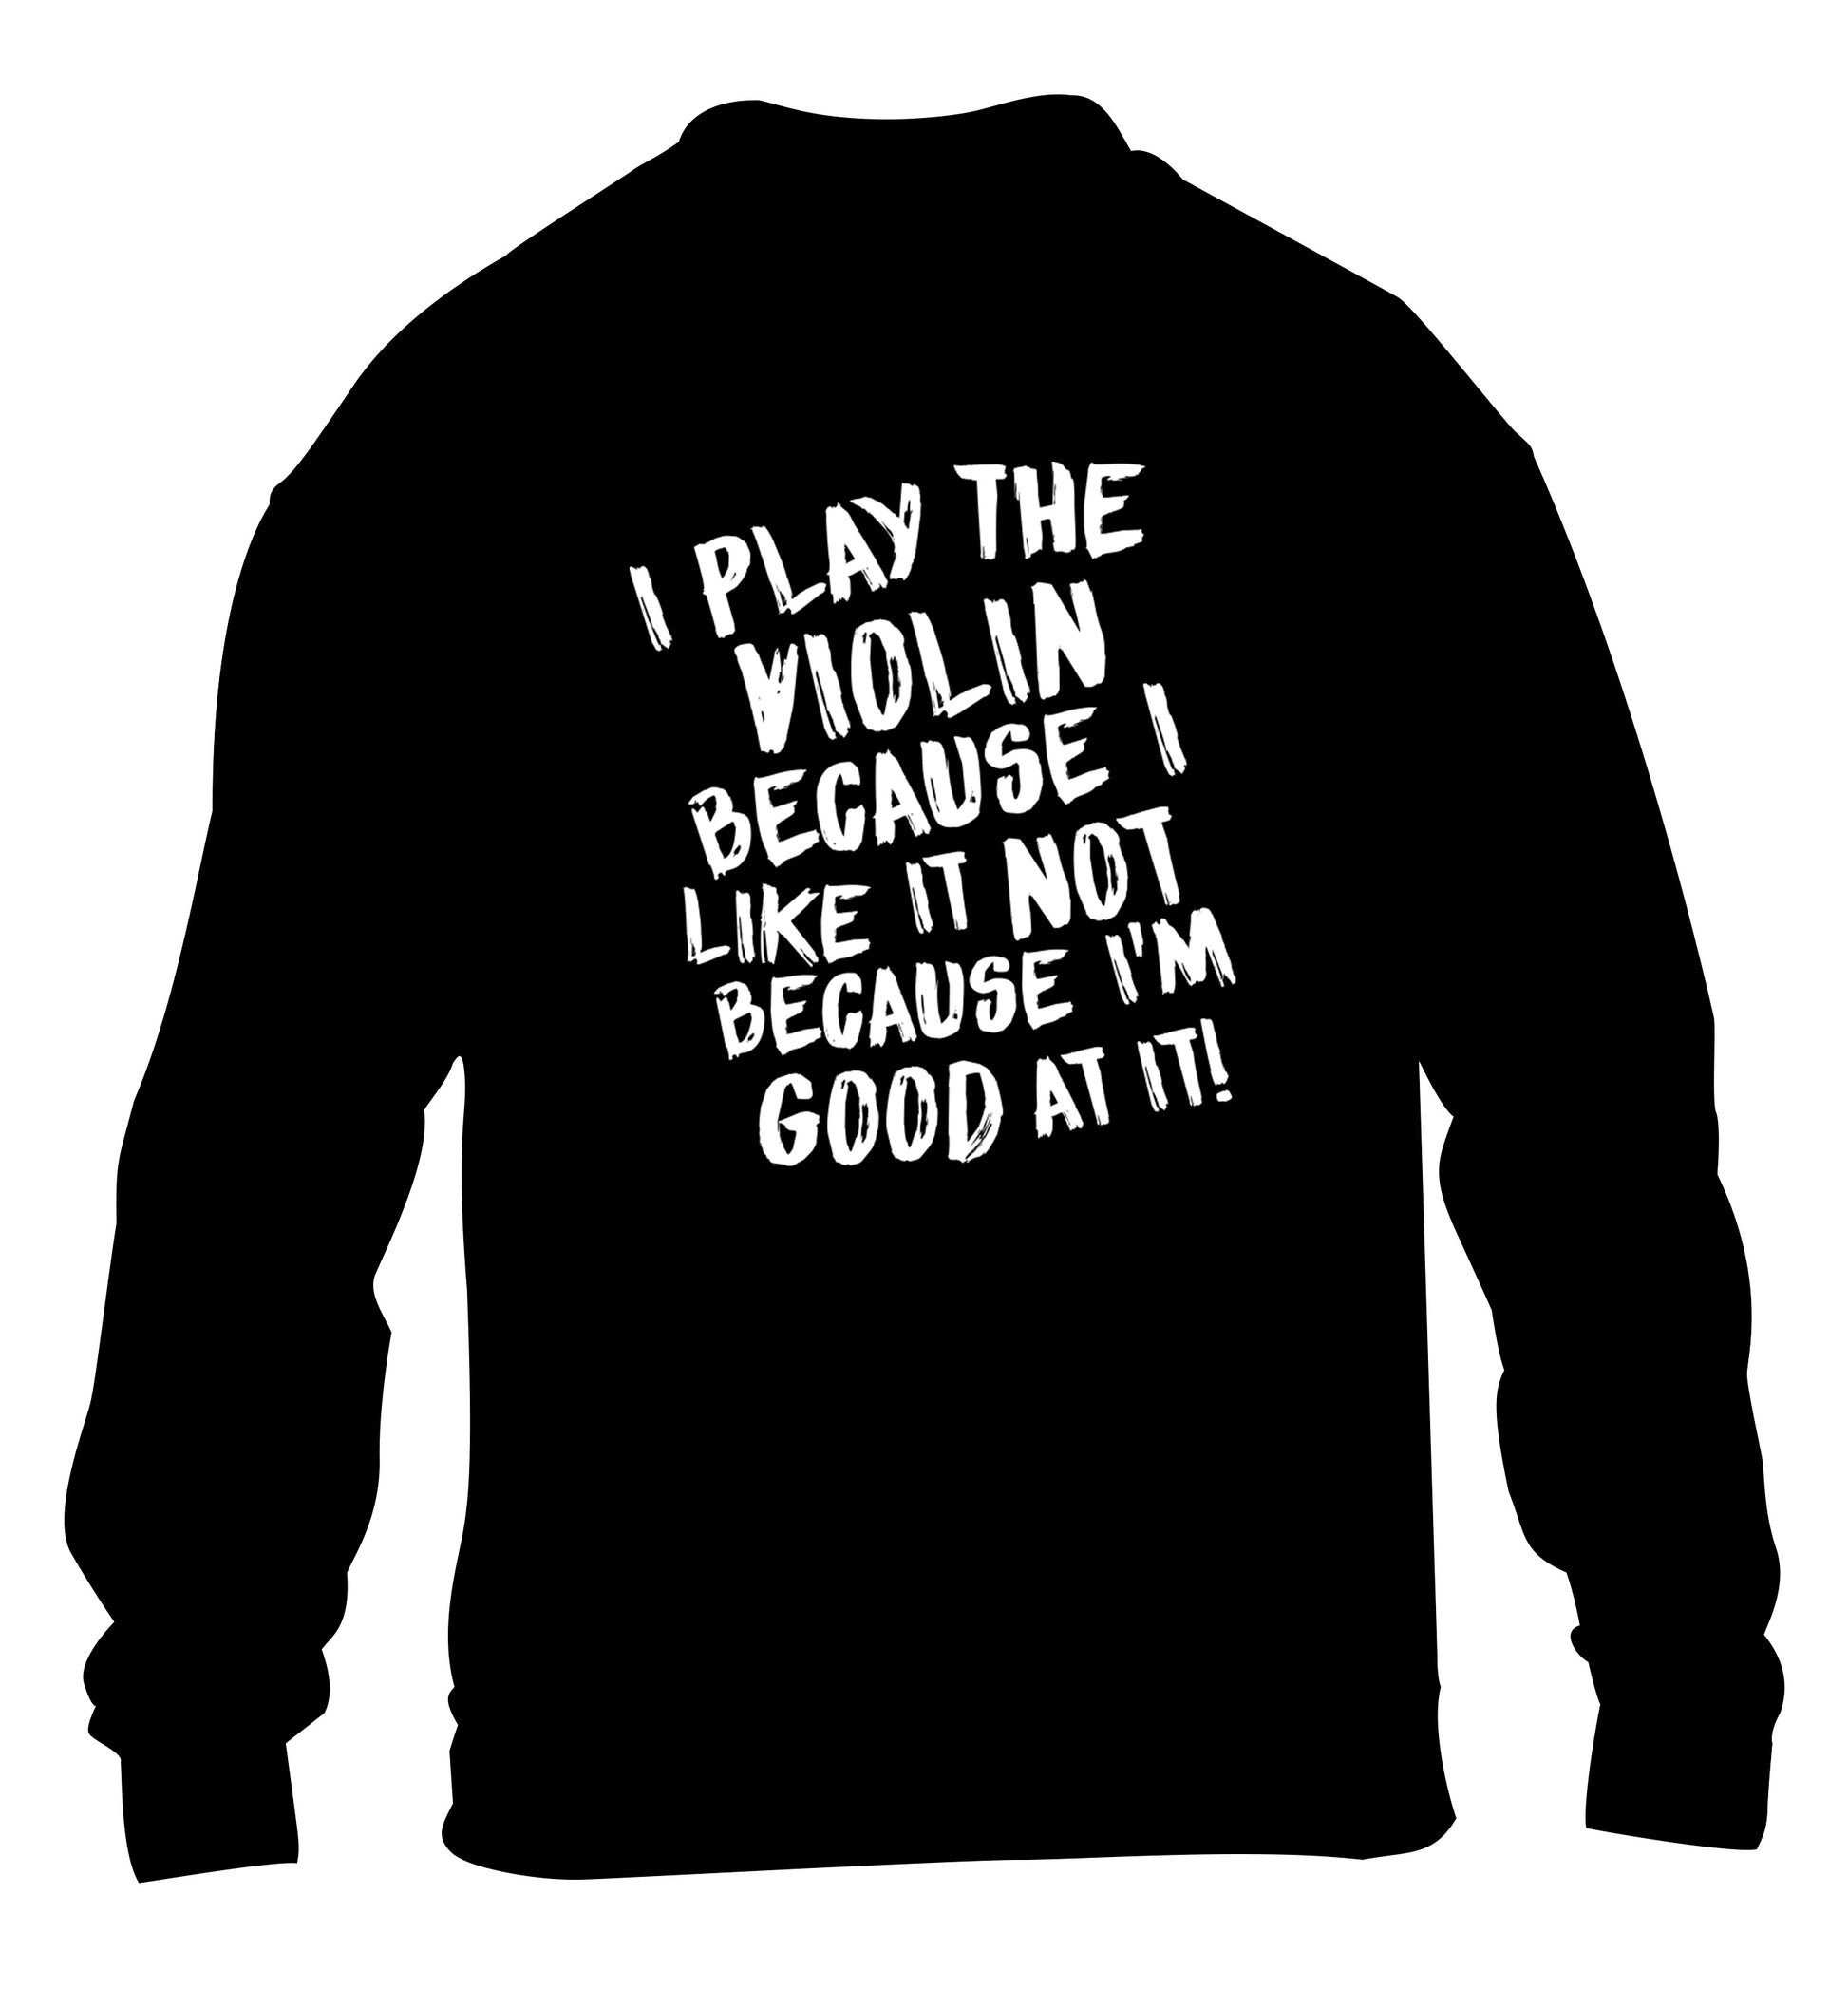 I play the violin because I like it not because I'm good at it children's black sweater 12-13 Years